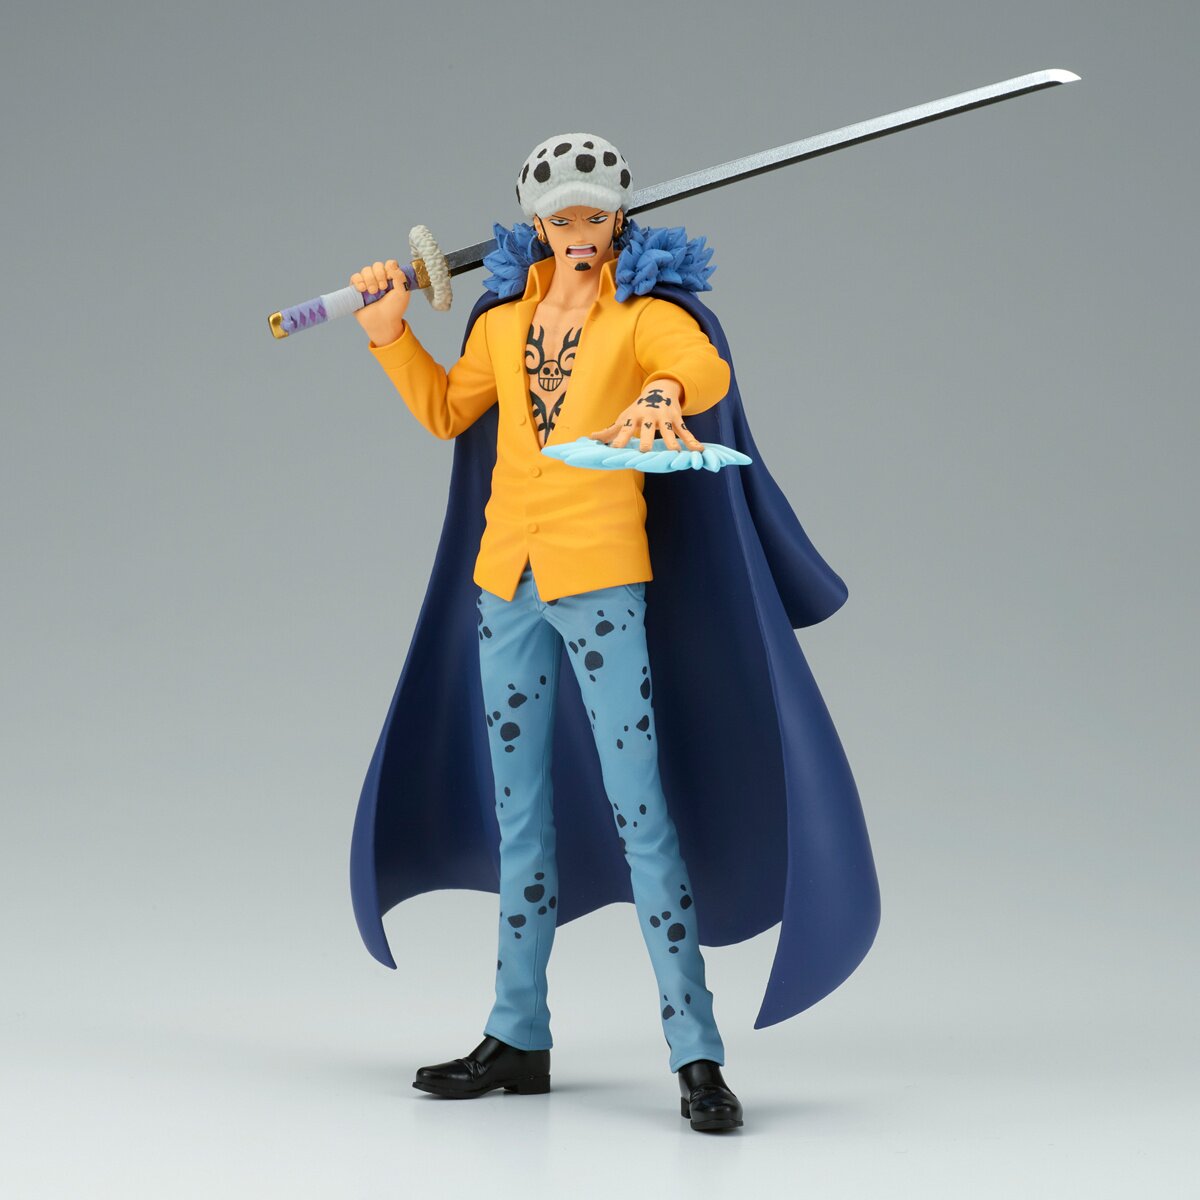 One Piece - Rob Lucci The Grandline Series DXF Extra Prize Figure